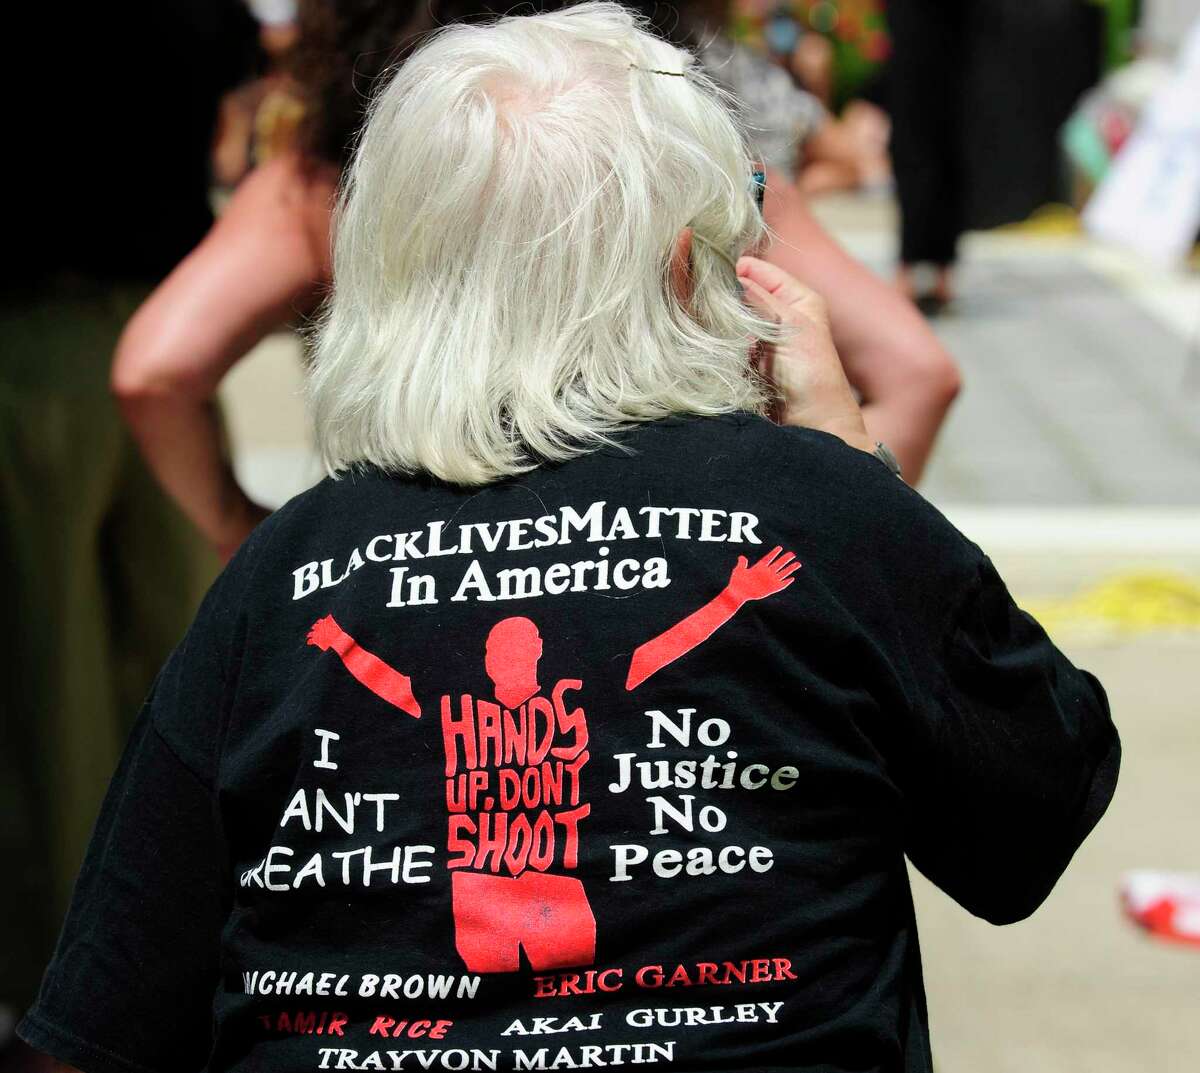 A protester listens to speakers during a rally outside Greenwich Town Hall on June 6. More than 600 protesters gathered peacefully to protest the senseless death of George Floyd and call for police reform.